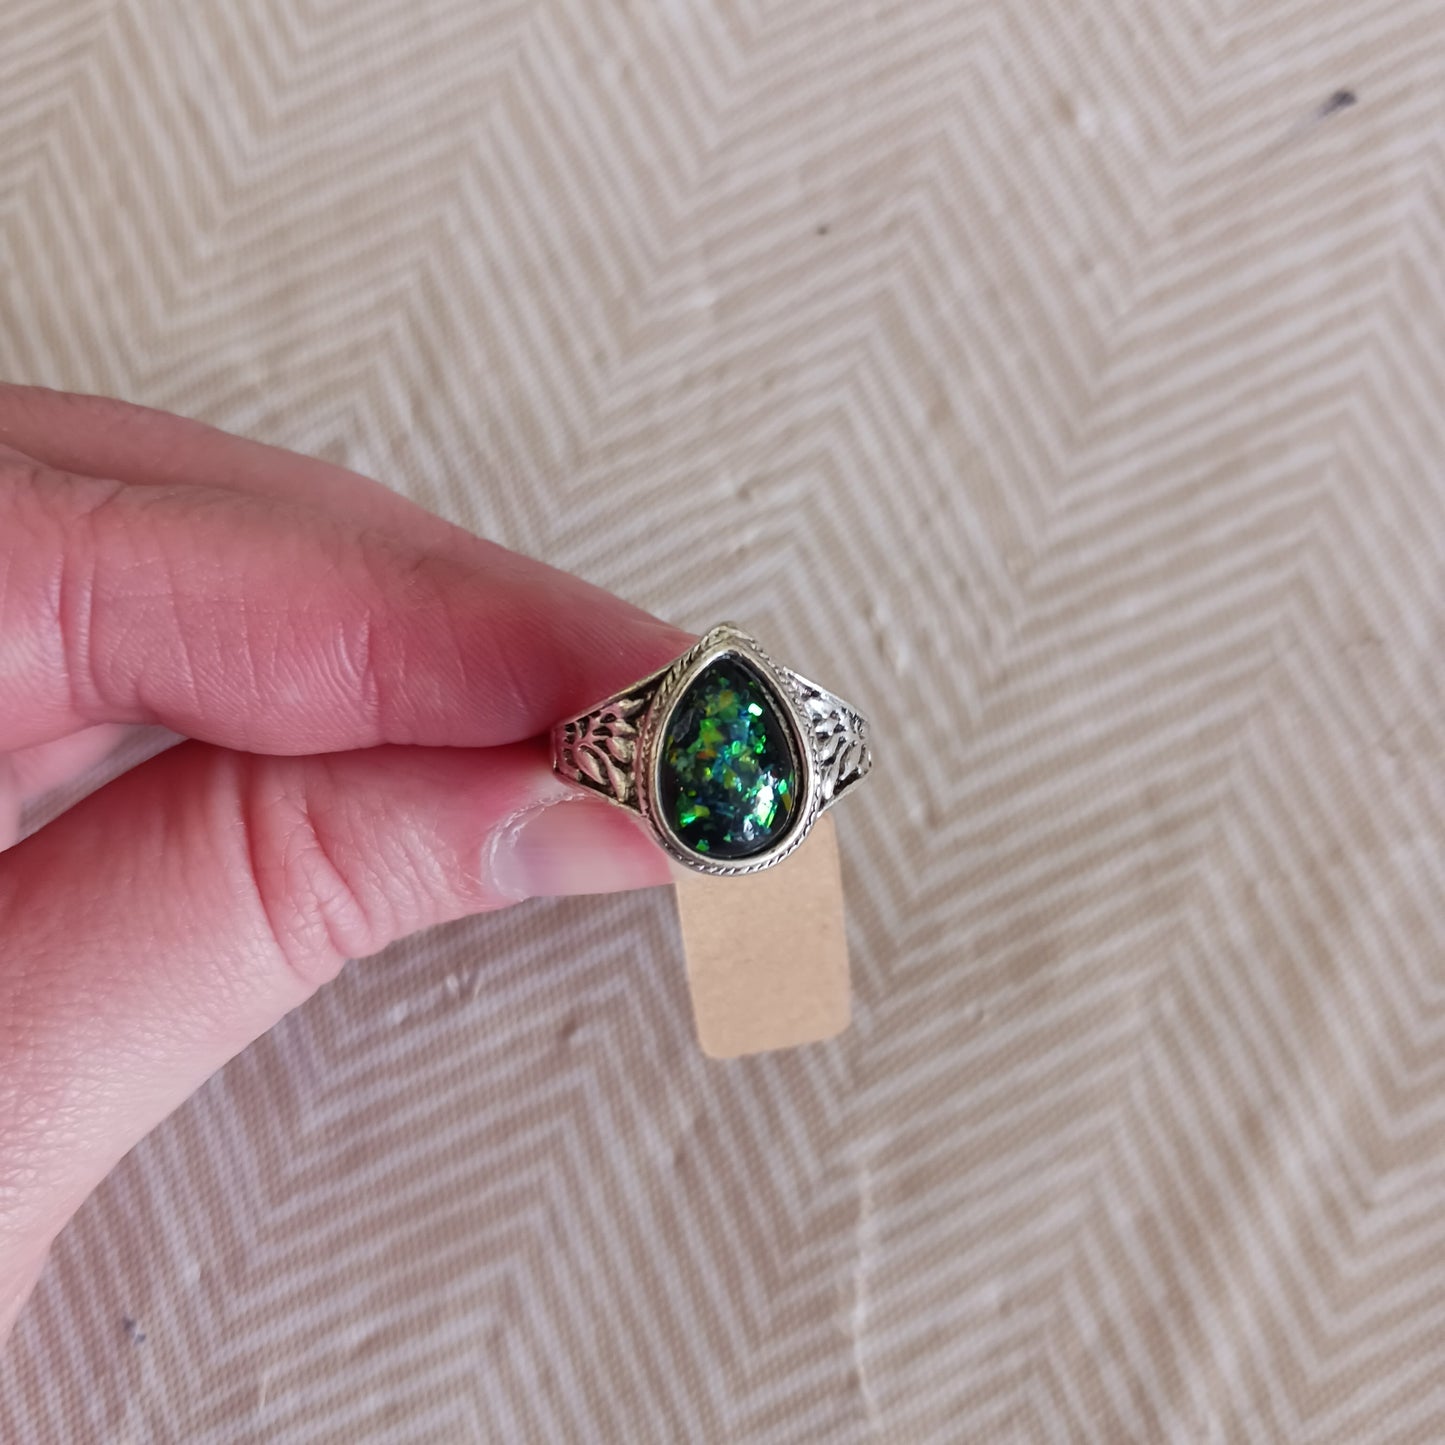 Green and Black Fashion Ring Size 6.5